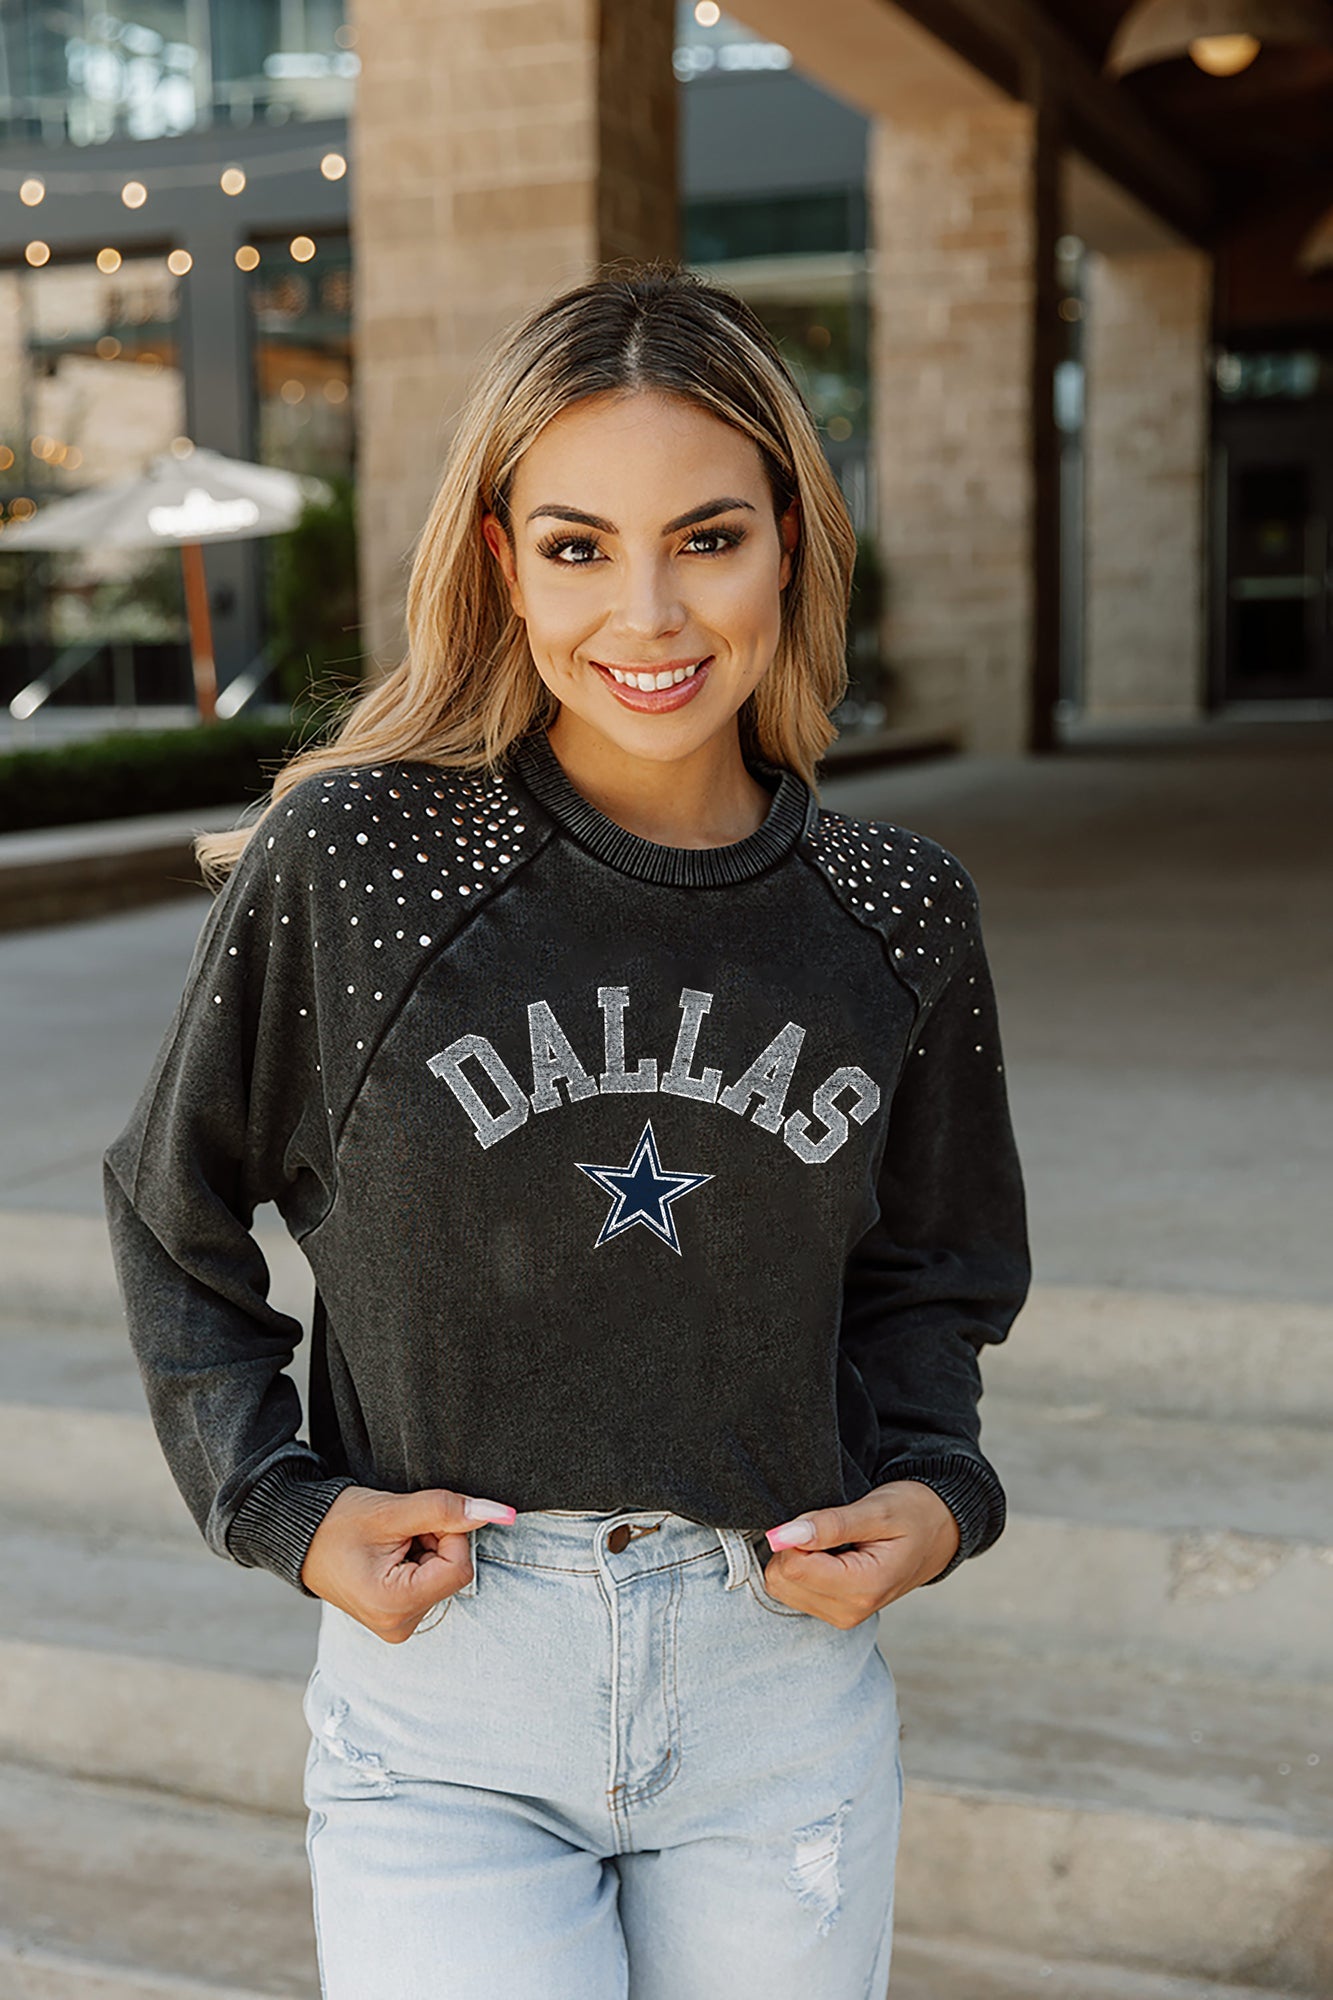 Women's Gameday Couture Gray Dallas Cowboys Elite Elegance Studded Sleeve Cropped T-Shirt Size: Medium